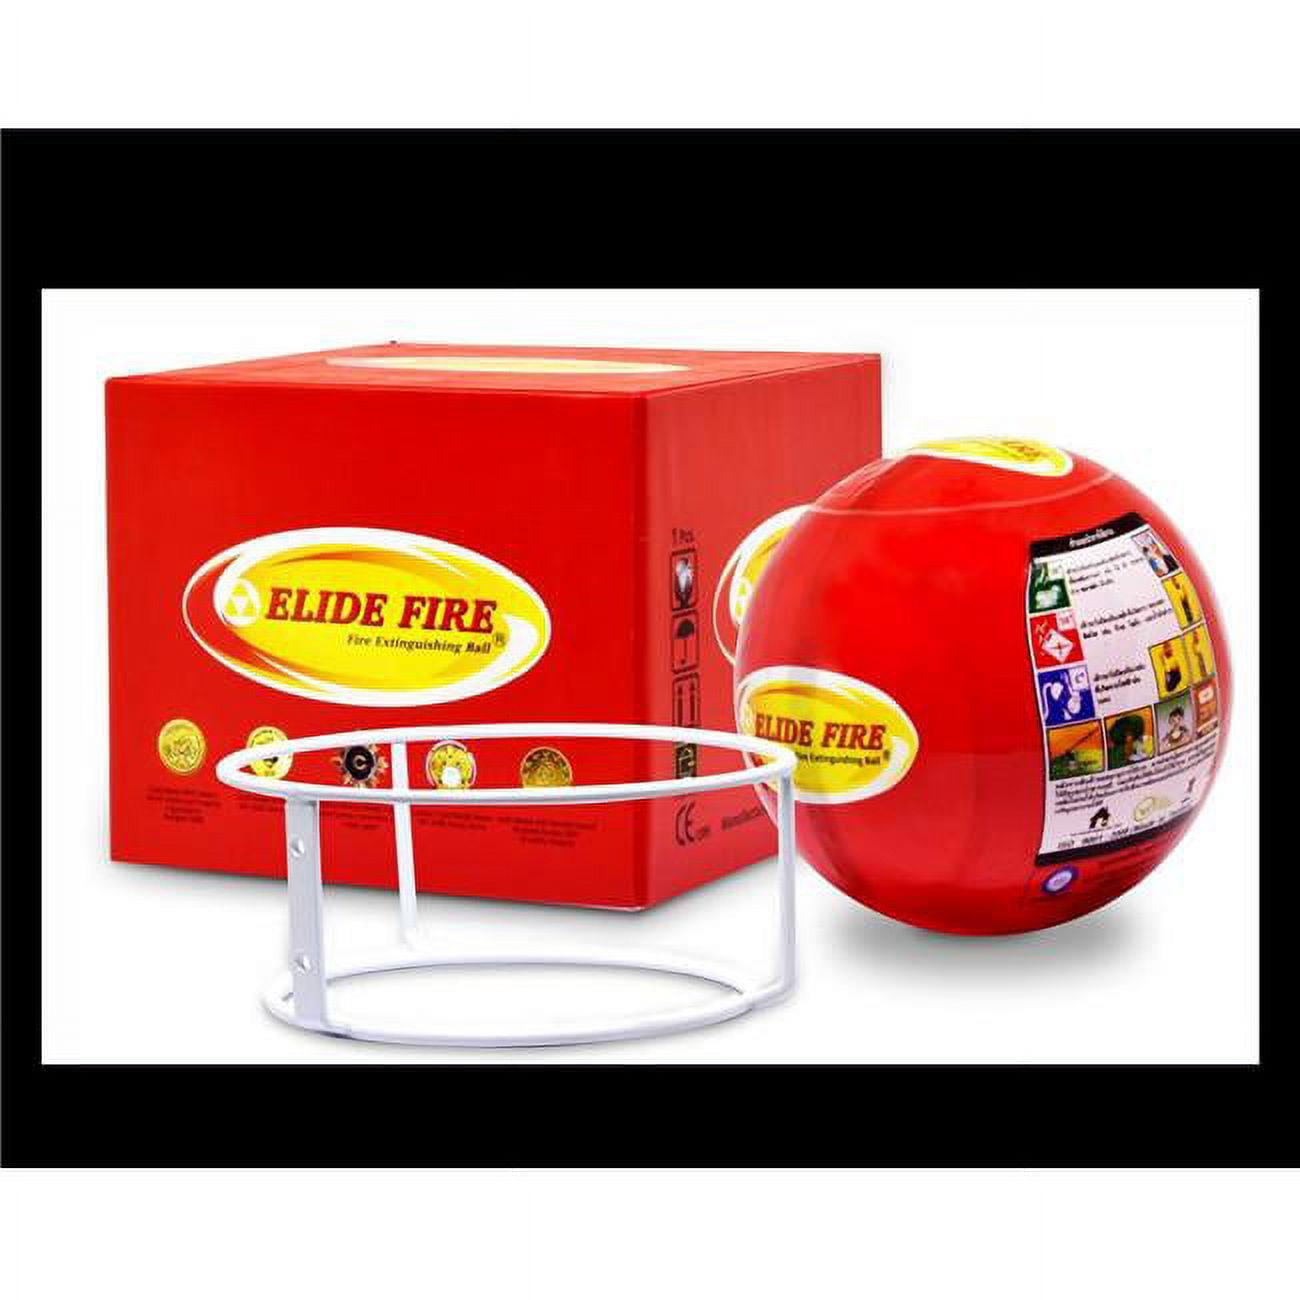 Elide Fire Automatic Fire Ball Extinguisher – Safetag